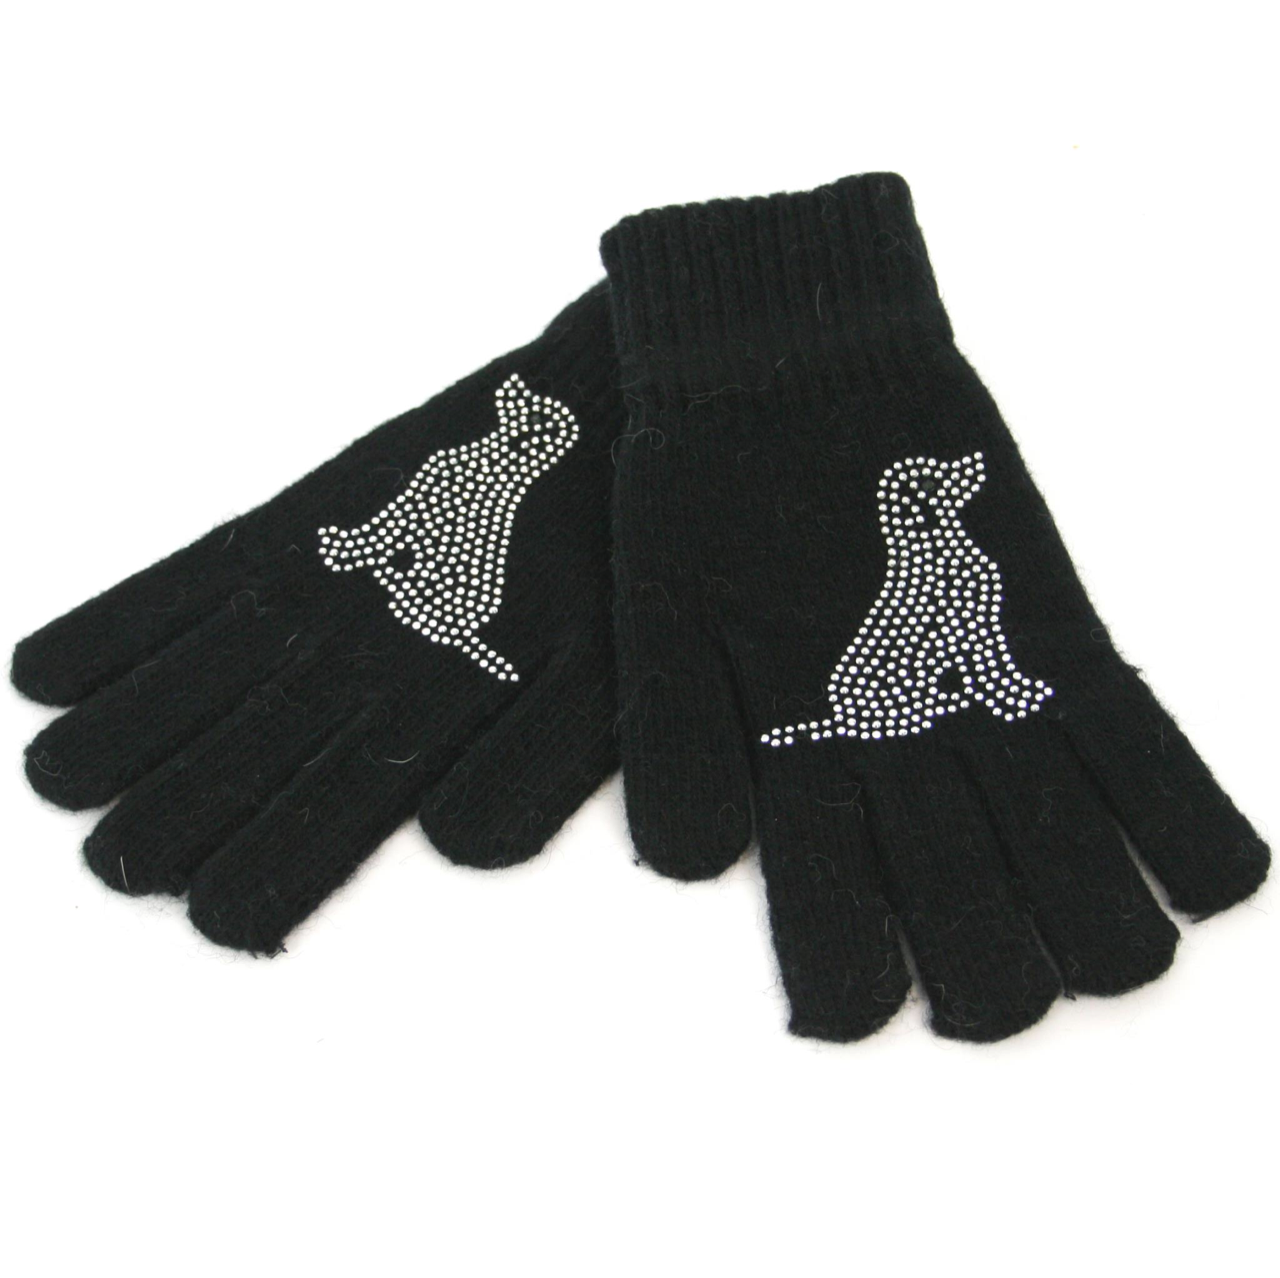 Warm Gloves with a Diamante Dog Pattern